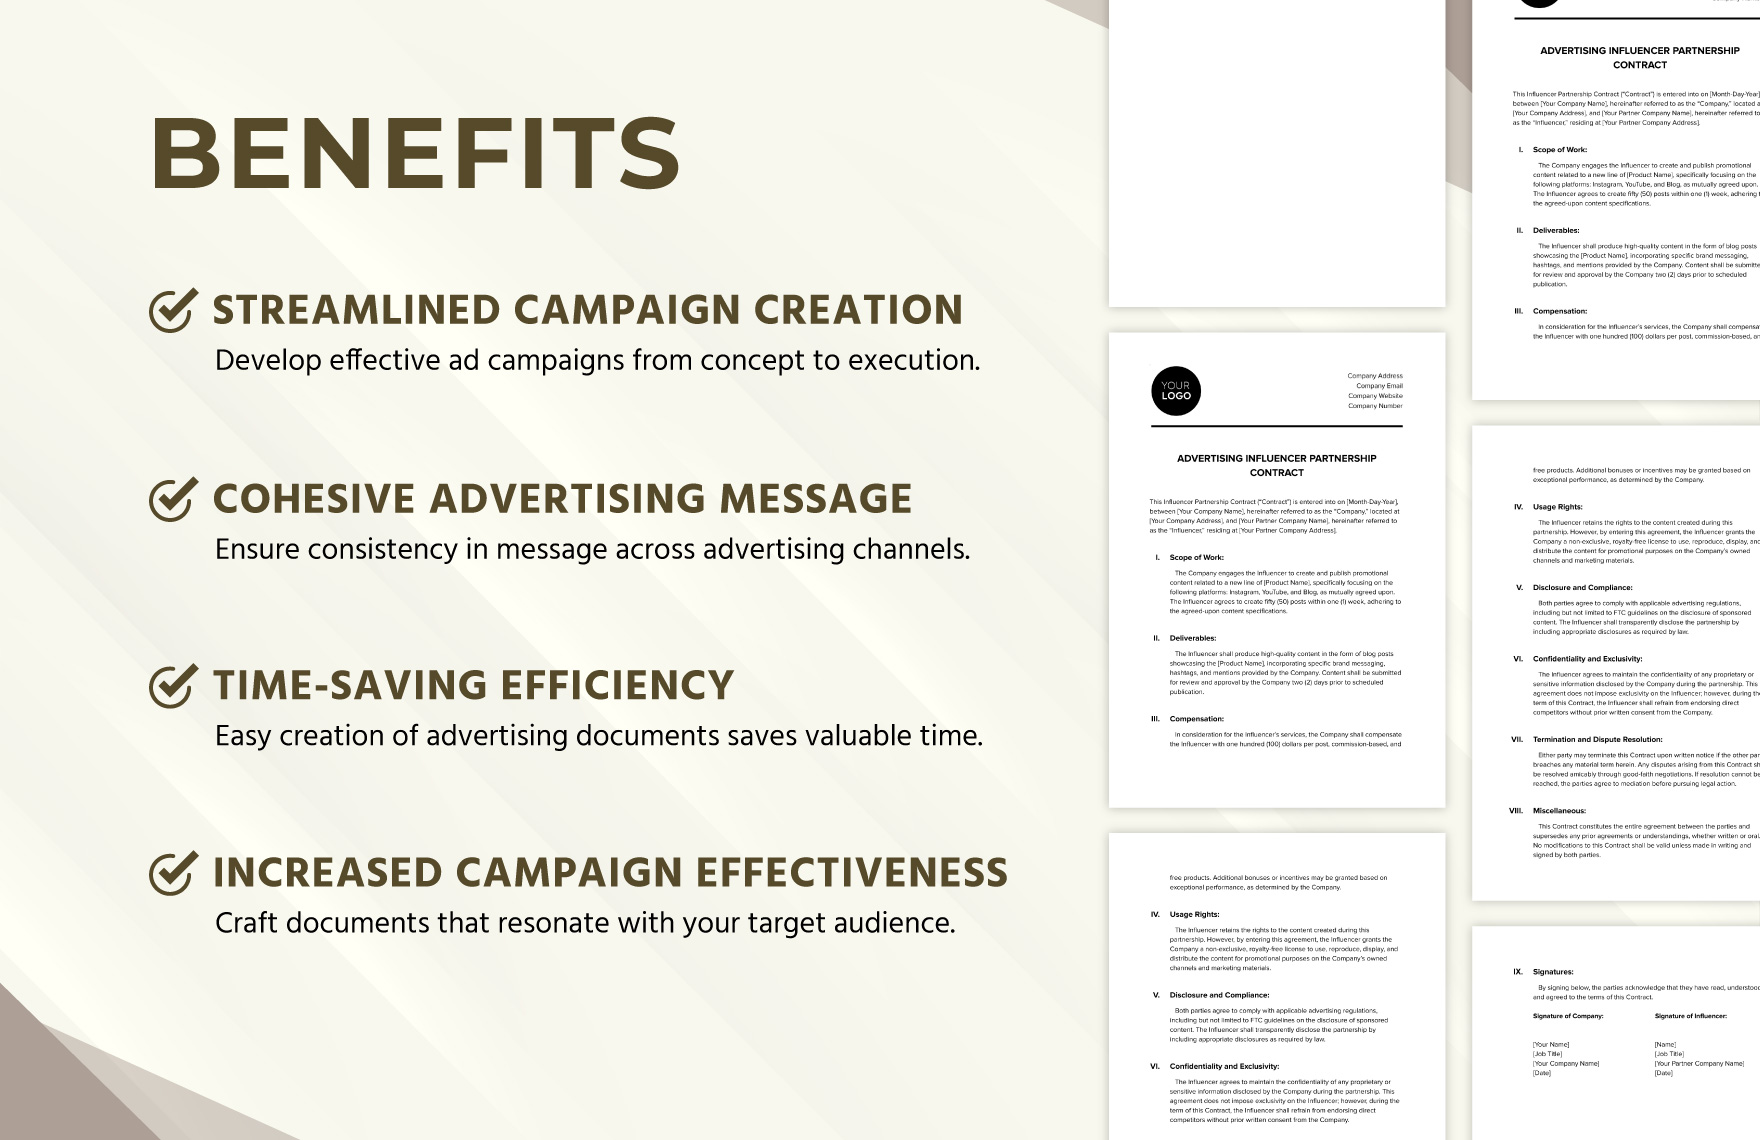 Advertising Influencer Partnership Contract Template